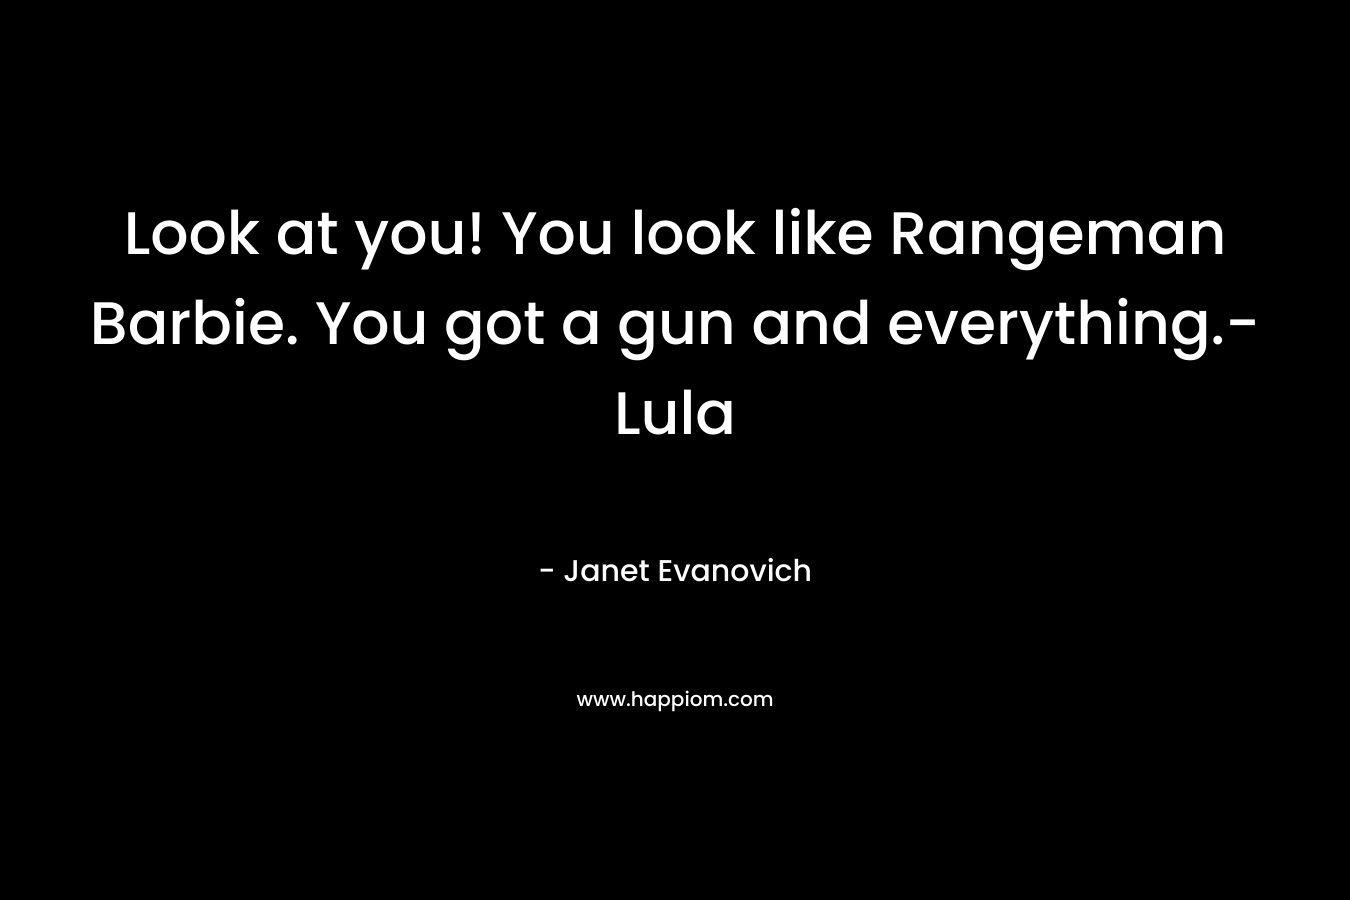 Look at you! You look like Rangeman Barbie. You got a gun and everything.-Lula – Janet Evanovich